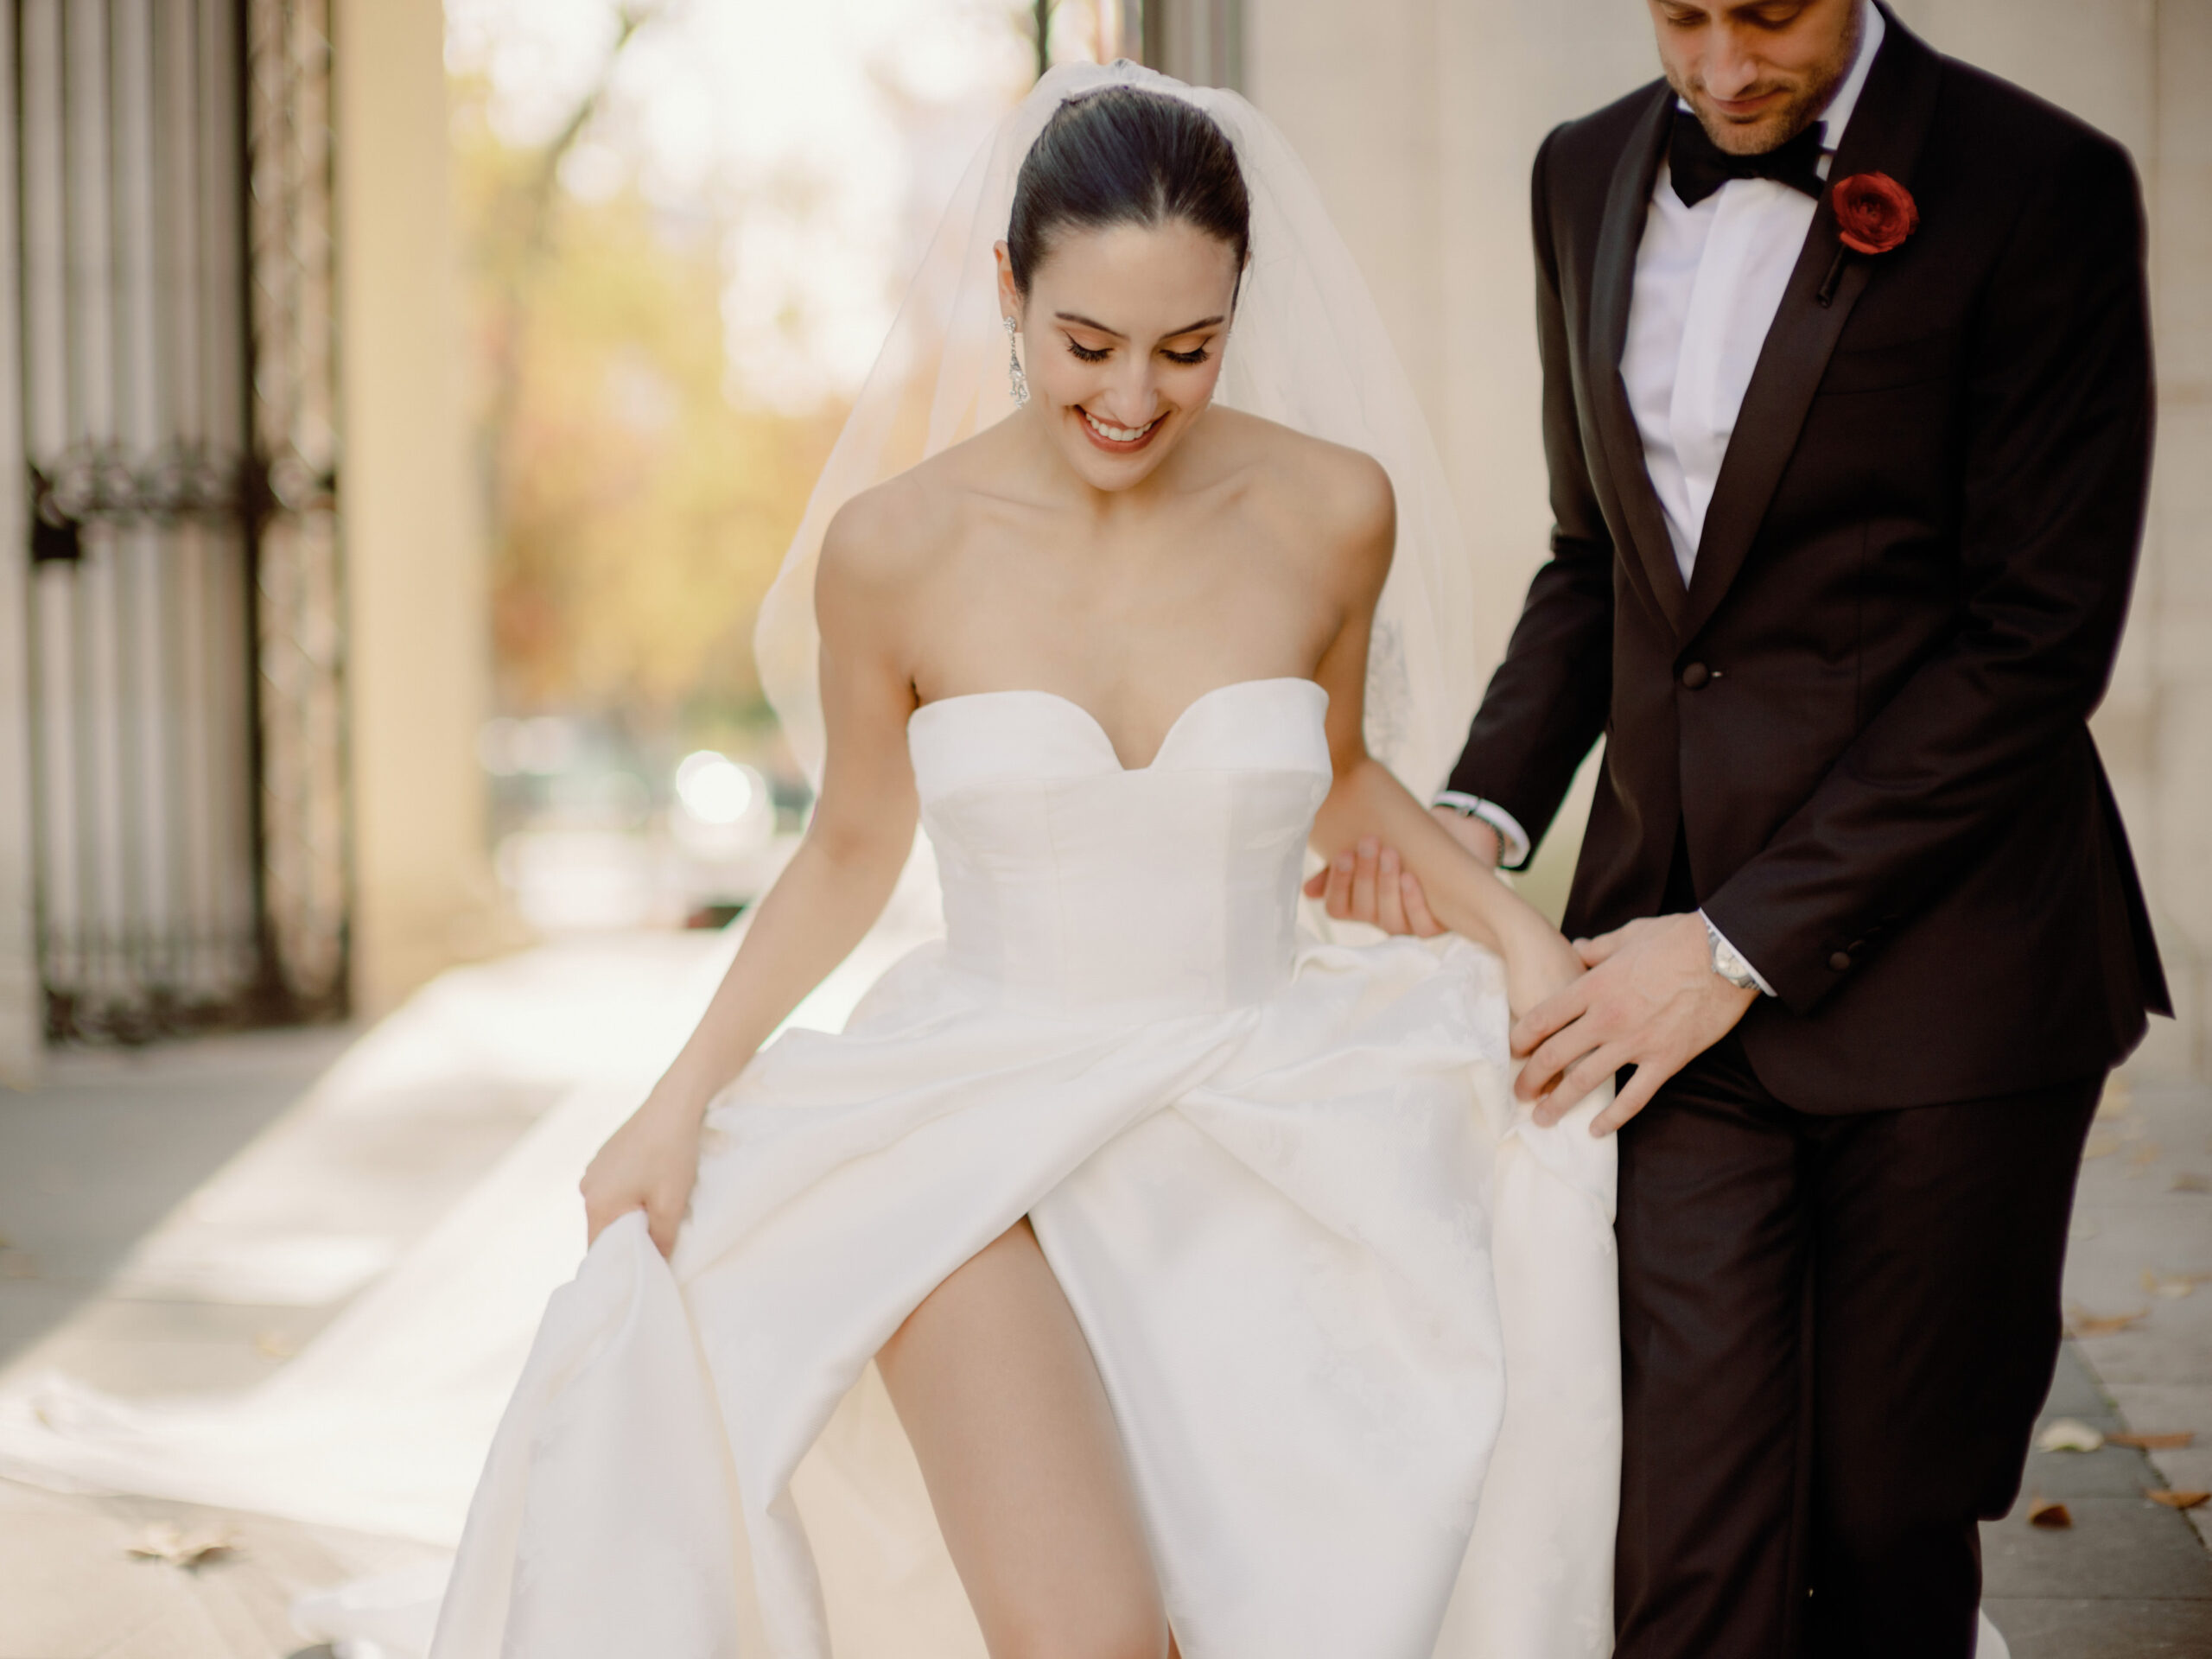 Editorial photo of the sexy bride, happily walking with her groom. Chic celebration image by Jenny Fu Studio